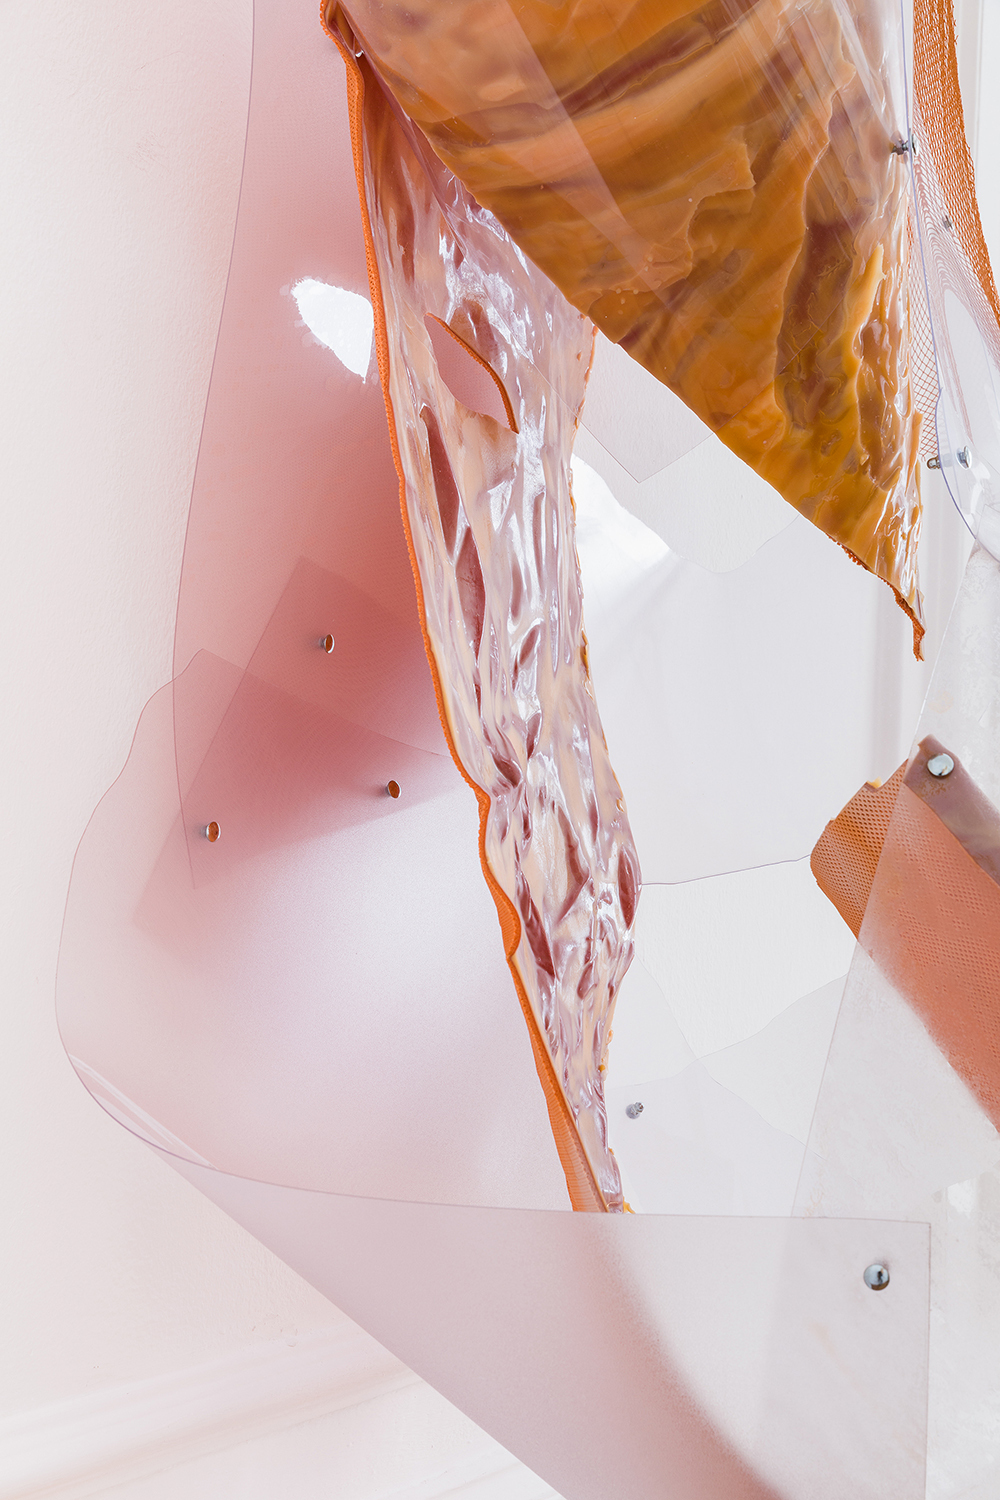 Sophie Hirsch you, non you, all you #1, 2020 Silicone, fabric, pigment, polycarbonate 95 x 310 x 91cm Detail view